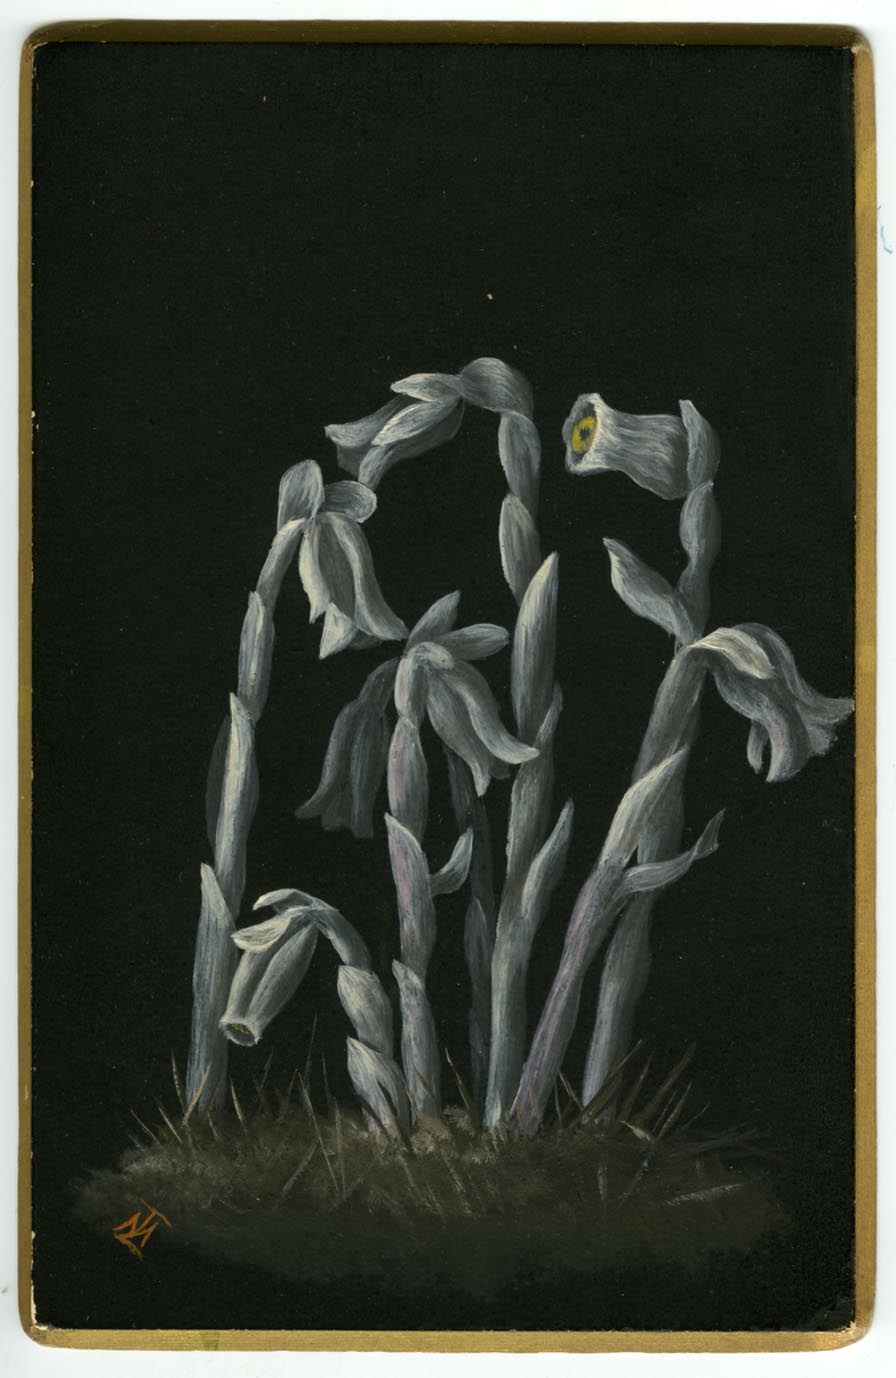 Cluster of six white ghost flowers ("Indian pipes") in a grassy bed. Painted over a black background with gold border.